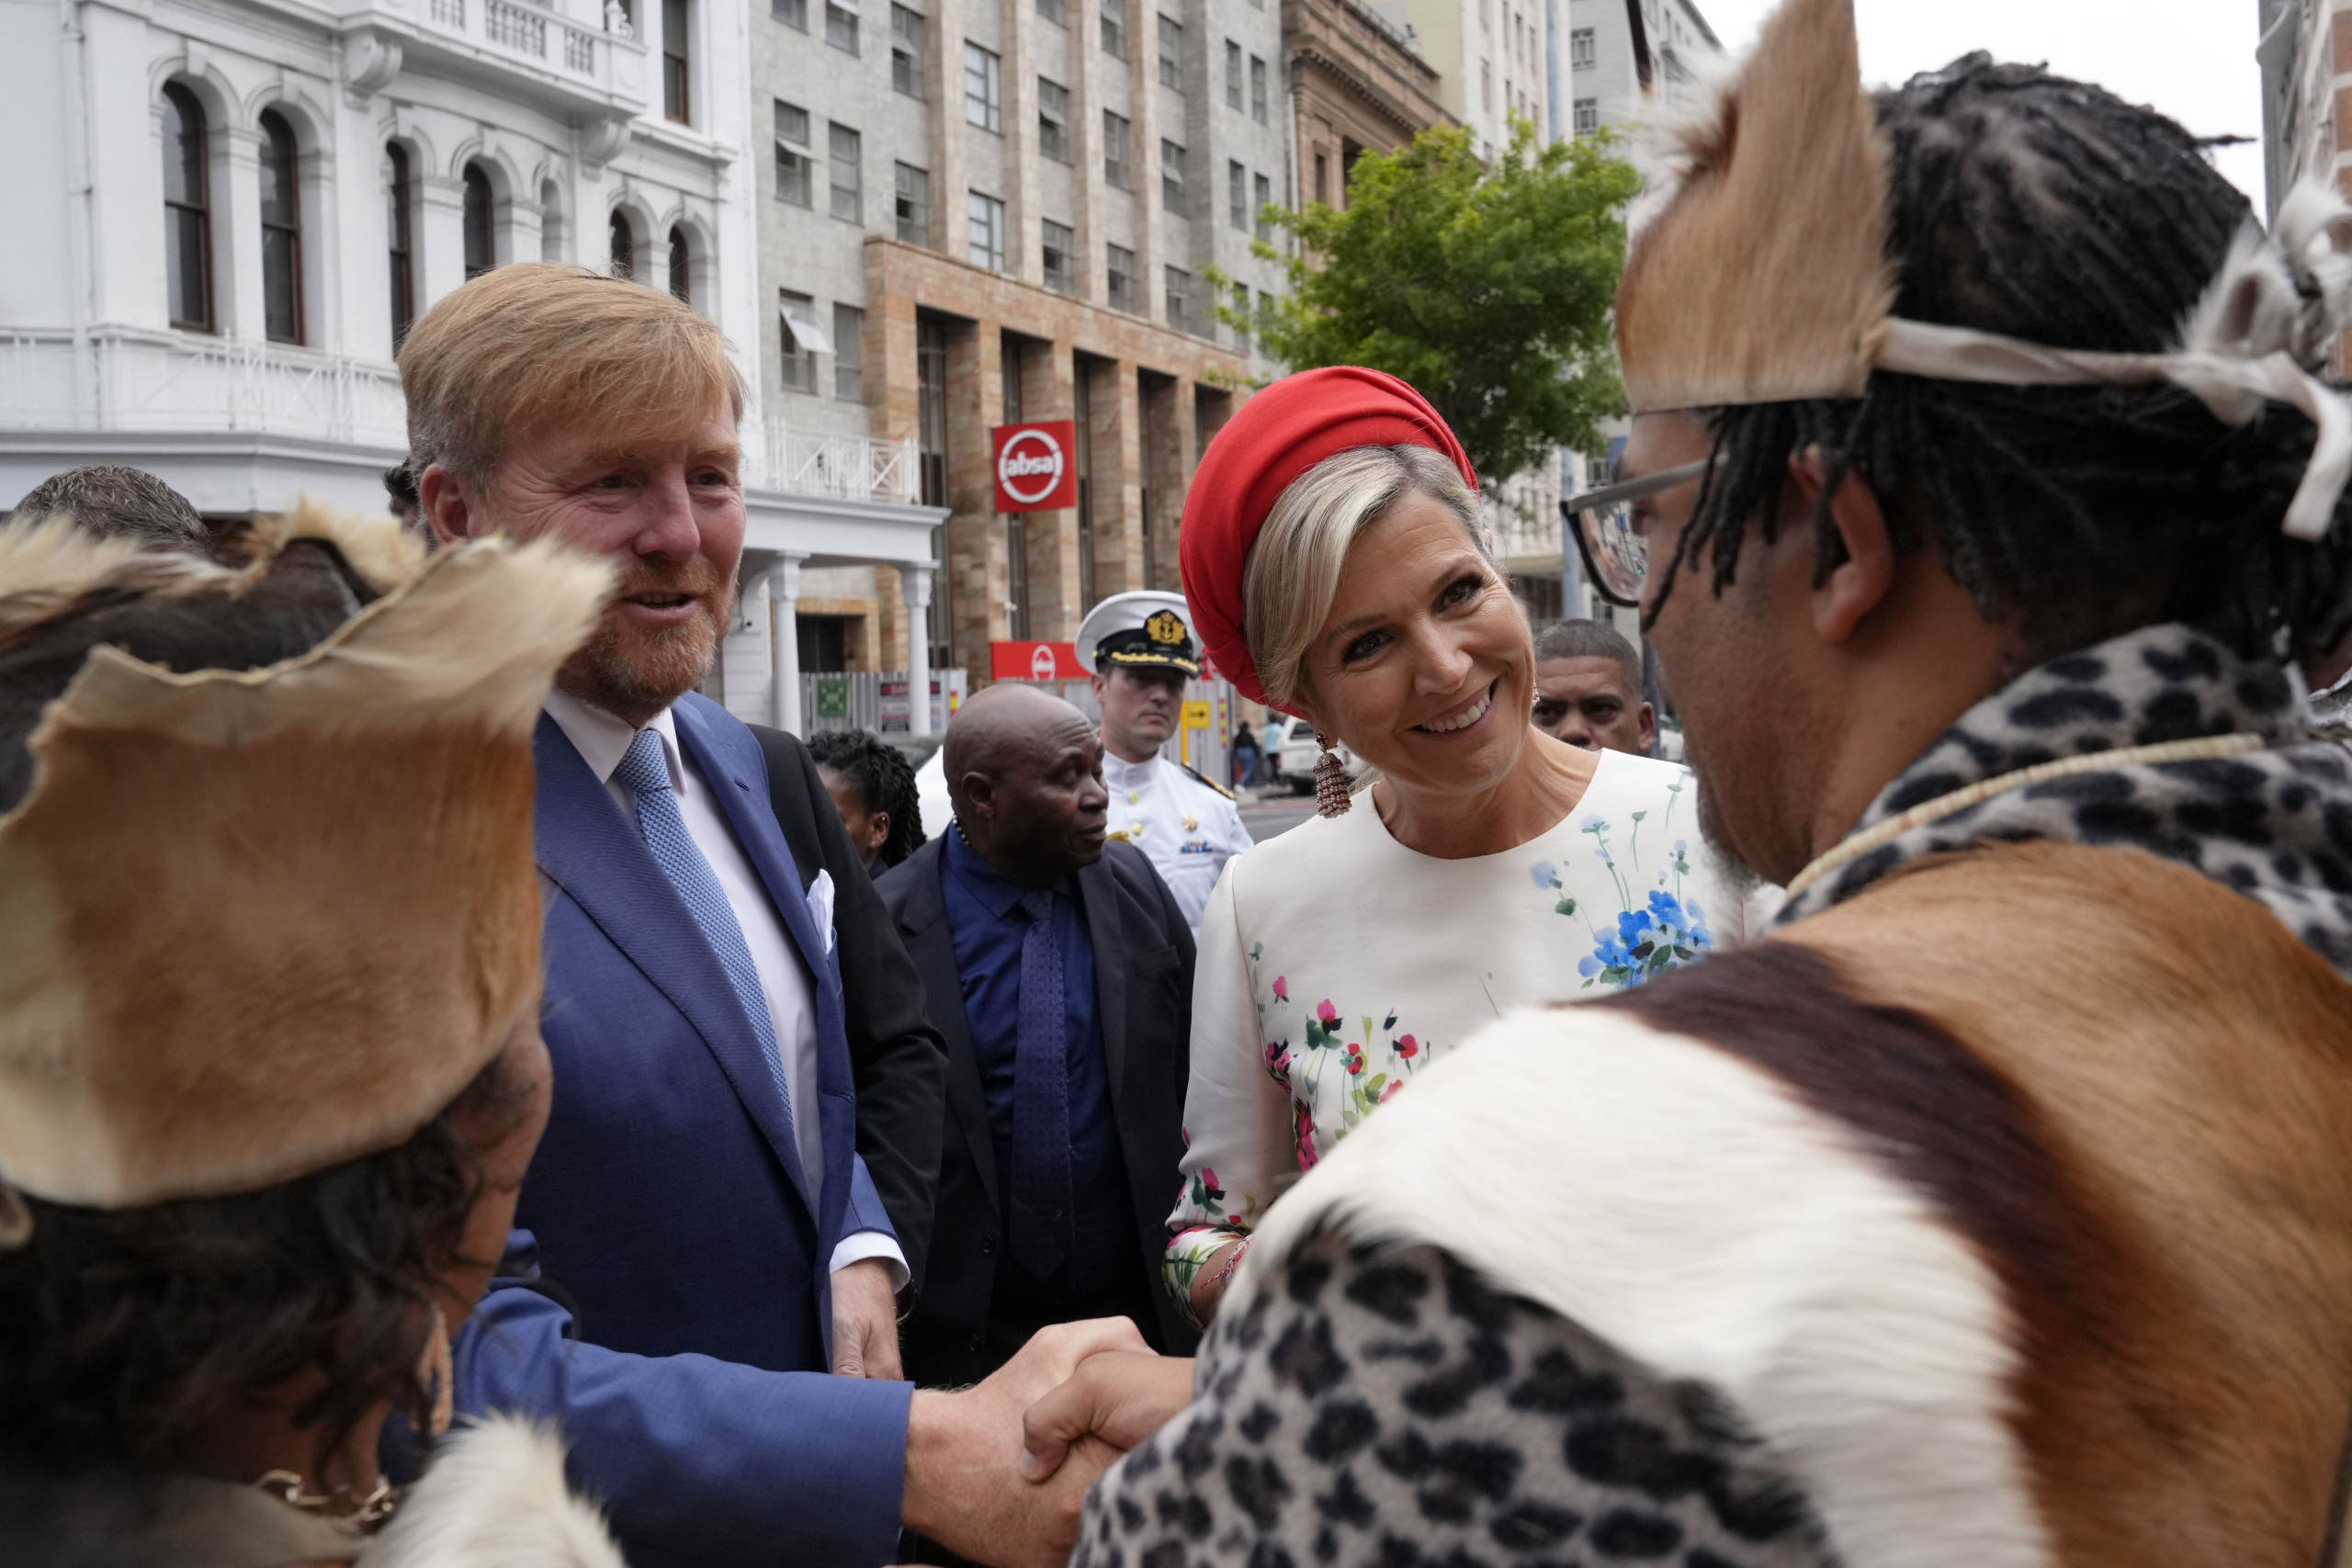 King Willem Alexander and Queen Maxima of the Netherlands arrive at the Iziko Slave Lodge museum in Cape Town during their state visit to South Africa, Friday, Oct. 20, 2023. The king and queen of the Netherlands were confronted by angry protesters in South Africa on a visit Friday to a monument that traces part of their country's involvement in slavery as a colonial power 300 years ago. (AP Photo/Nardus Engelbrecht)


Associated Press/LaPresse
Only Italy and Spain